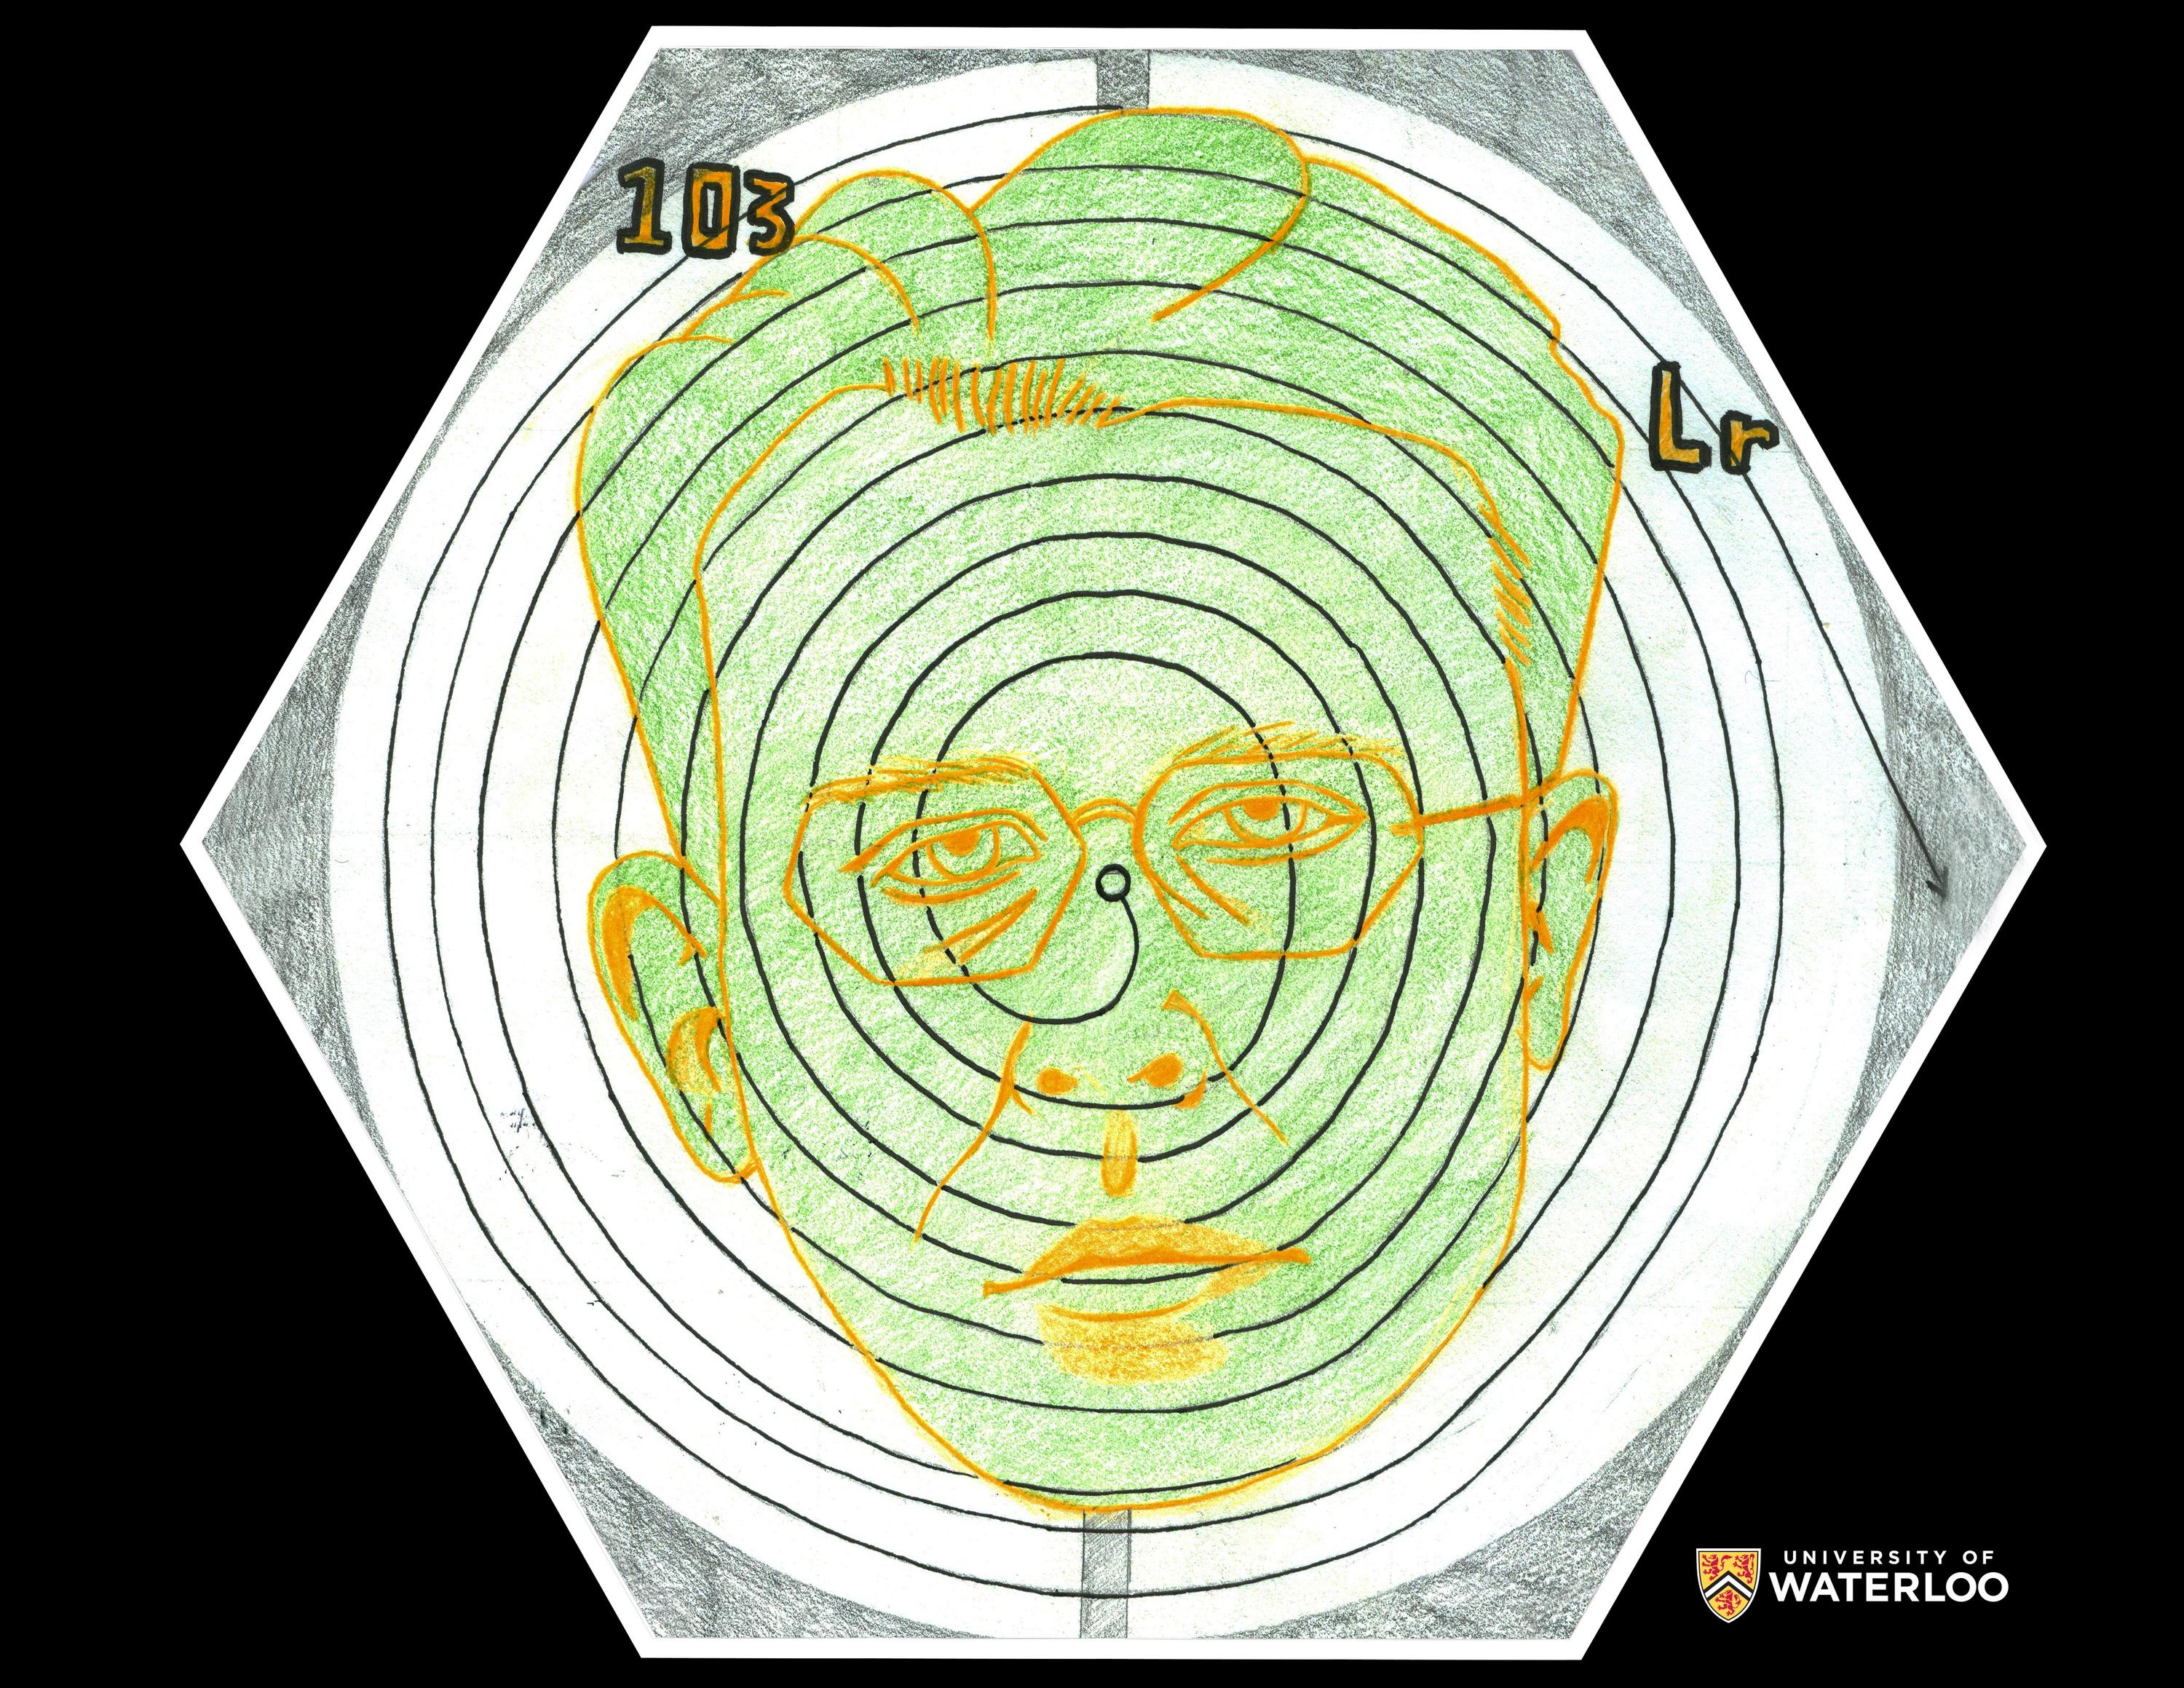 Coloured pencil on white paper. The circular path of a cyclotron overlays a portrait of Ernest Lawrence’s face outlined in orange and shaded in green. “Lr” and “103” appear at the top along the outermost path.